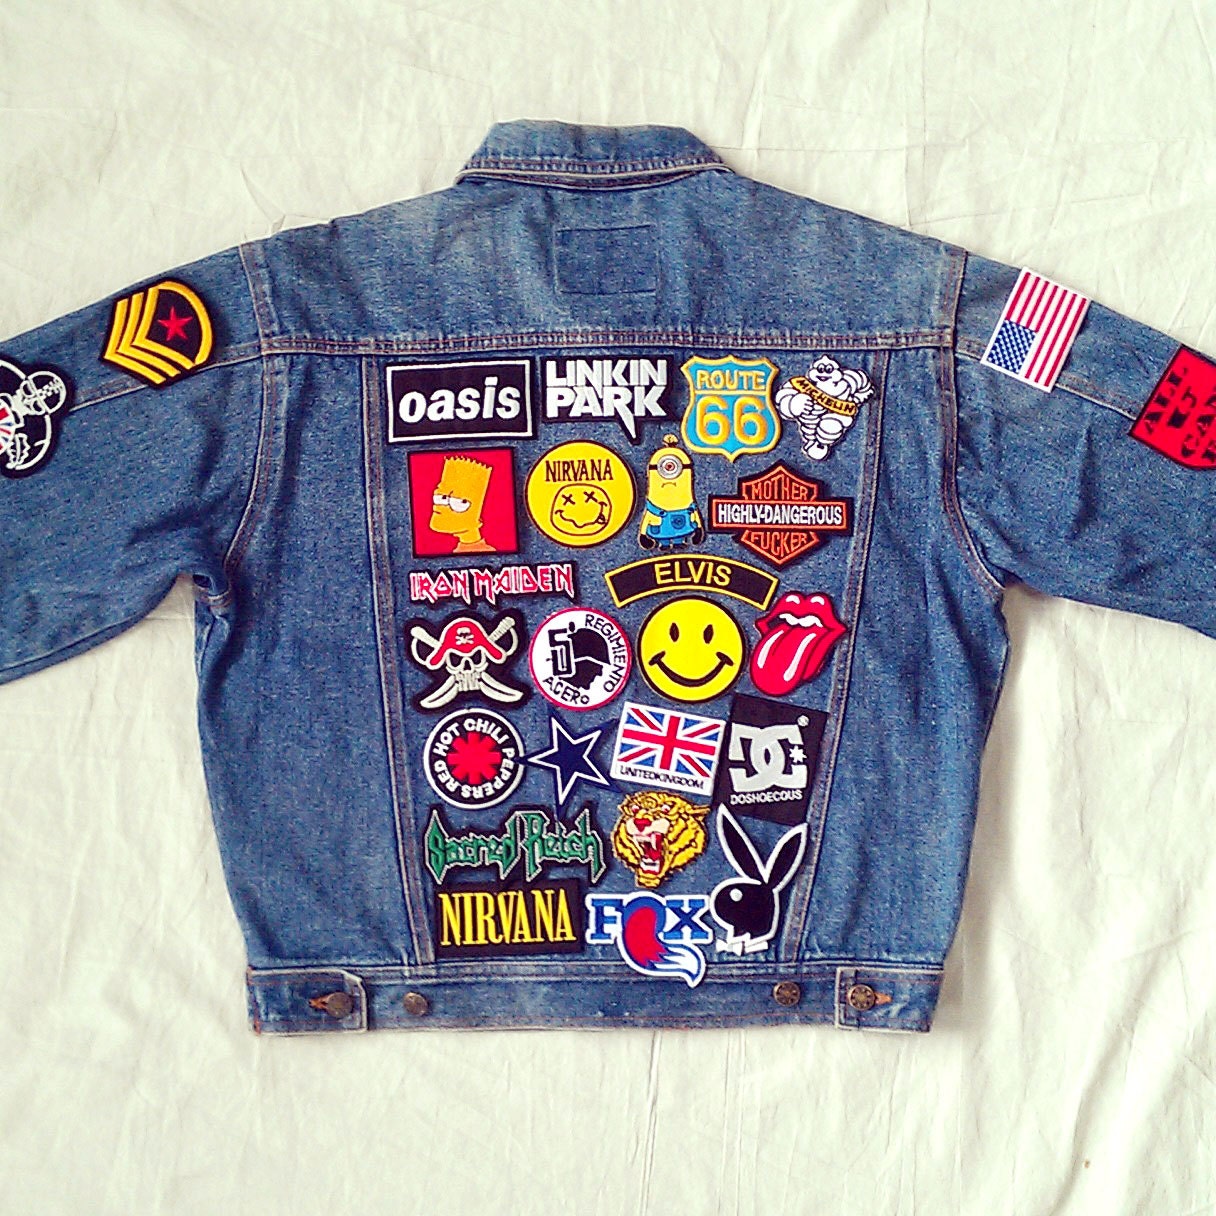 Patched Denim / Reworked Vintage Jean Jacket with Patches